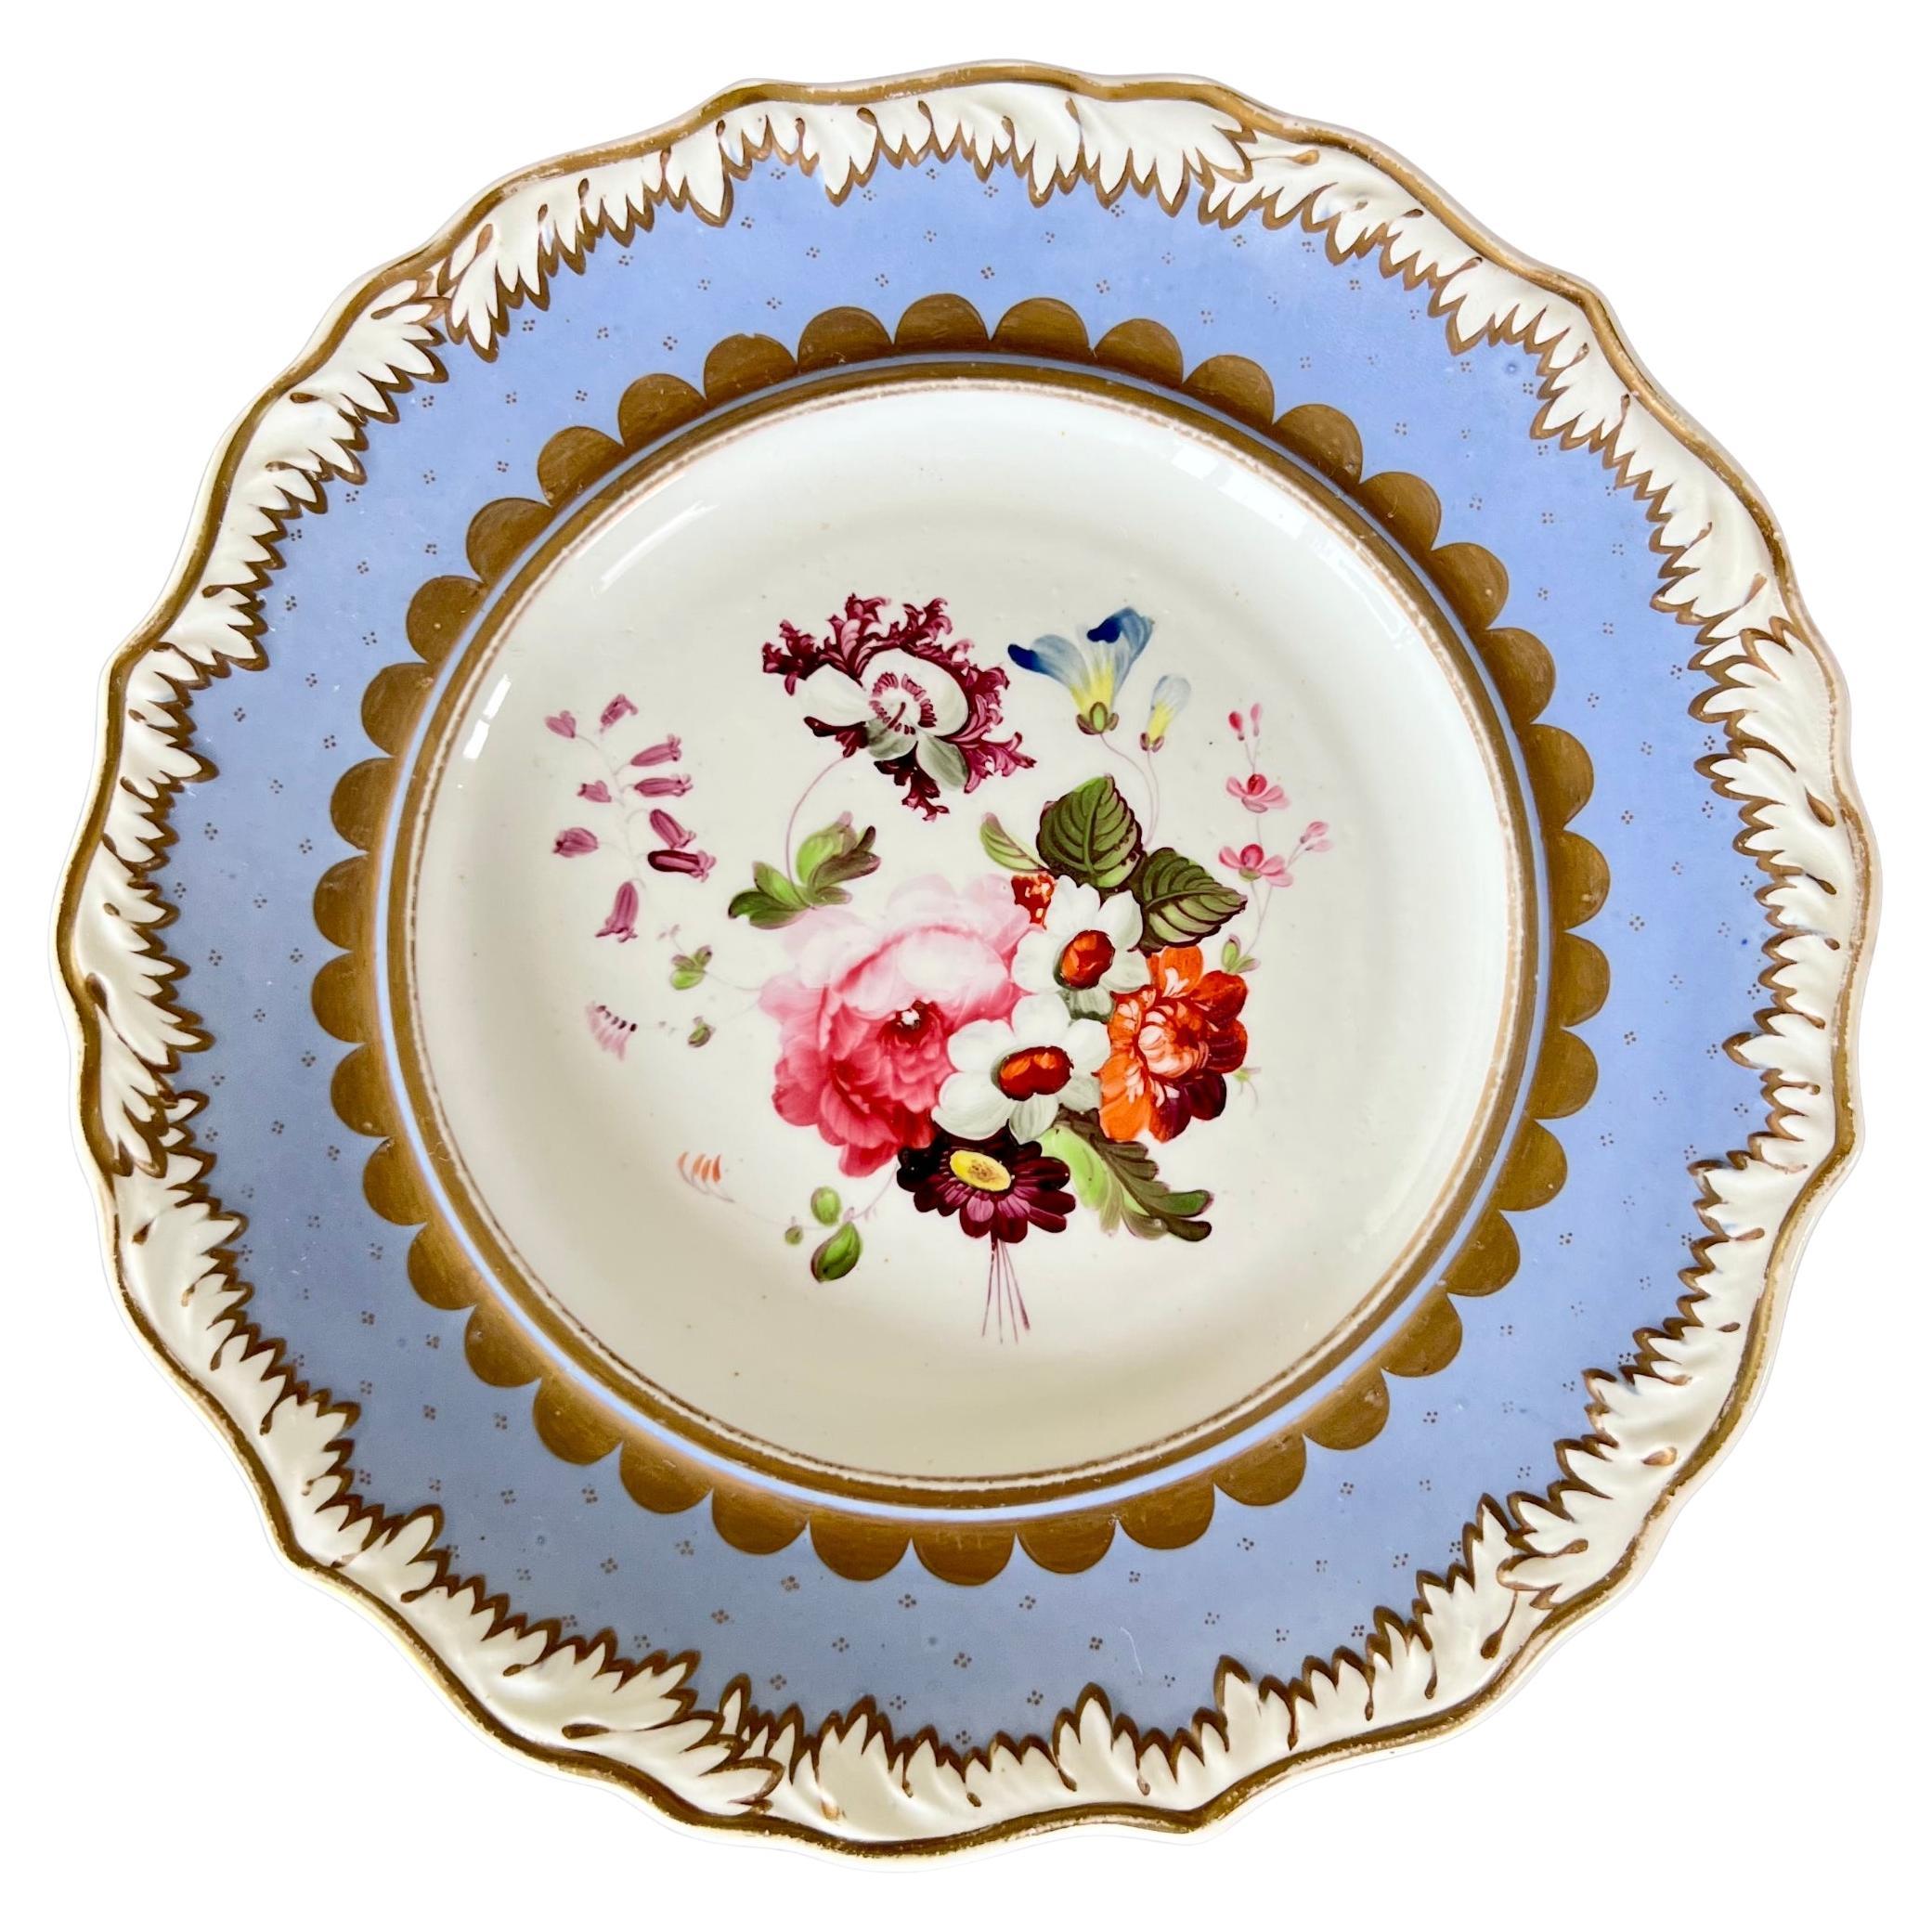 Samuel Alcock Plate, Melted Snow Border, Periwinkle Blue Lilac, Flowers, ca 1822 For Sale